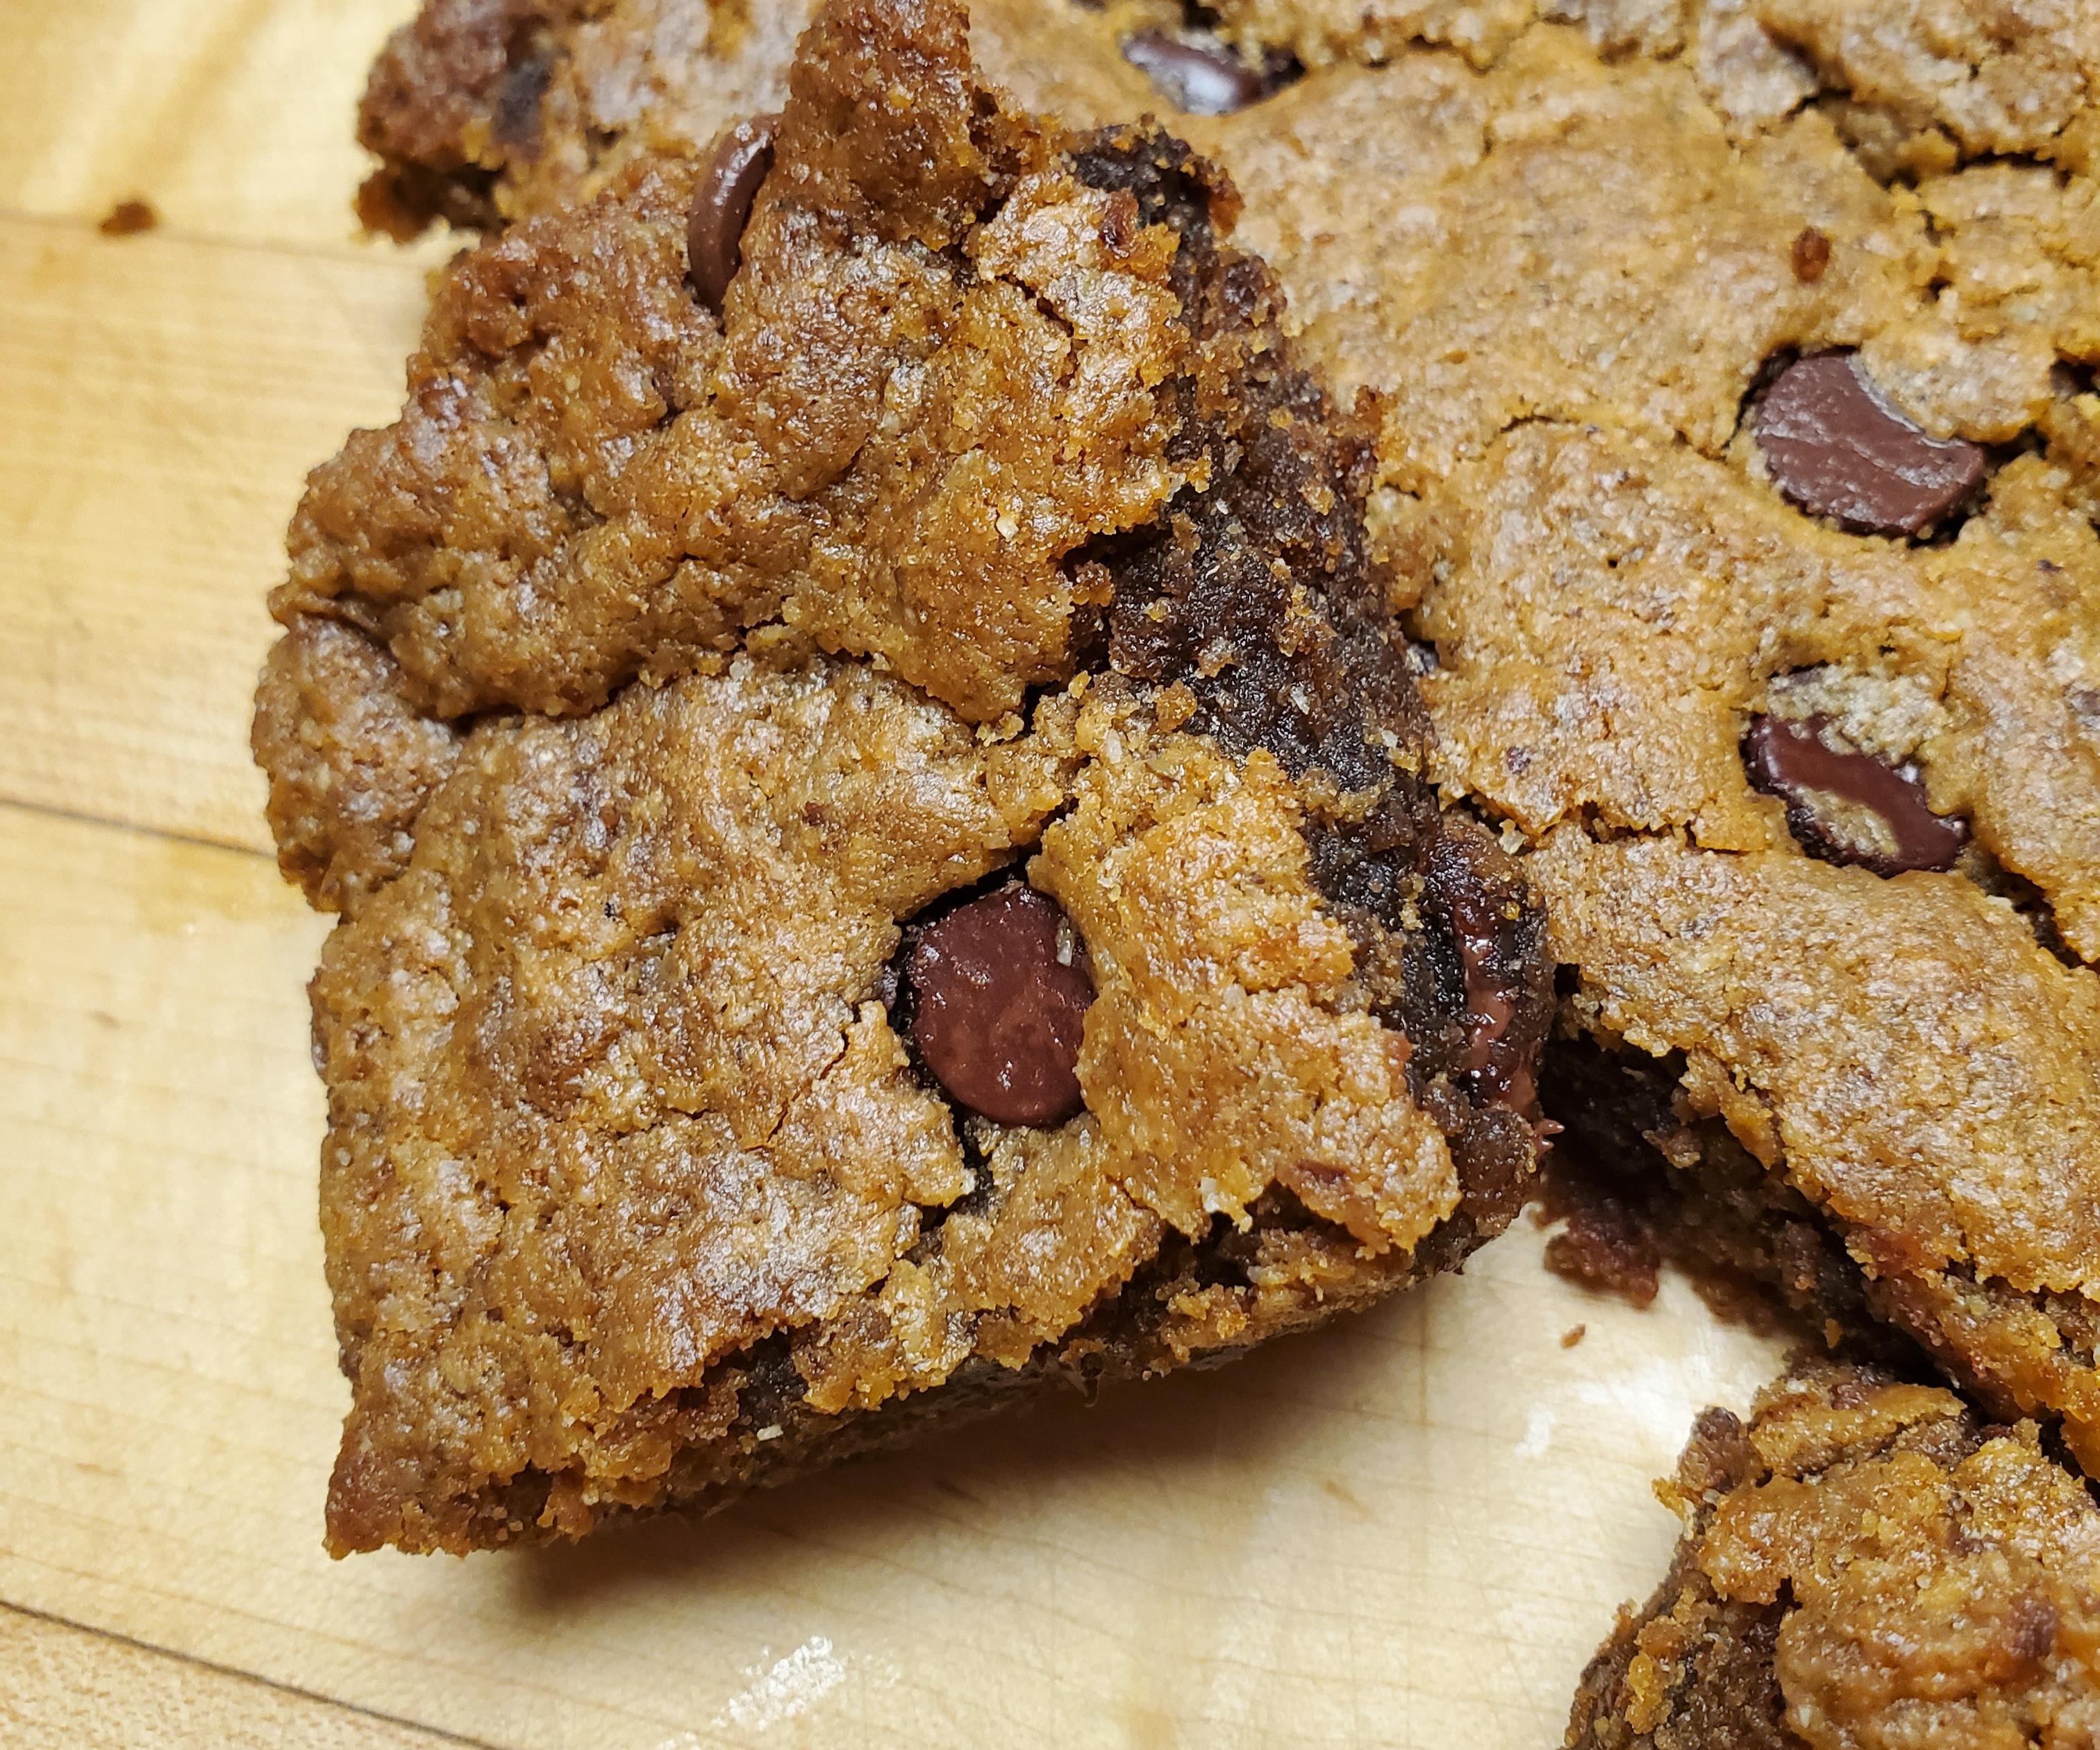 Nut-butter Chocolate Blondies, Flour and Egg Free